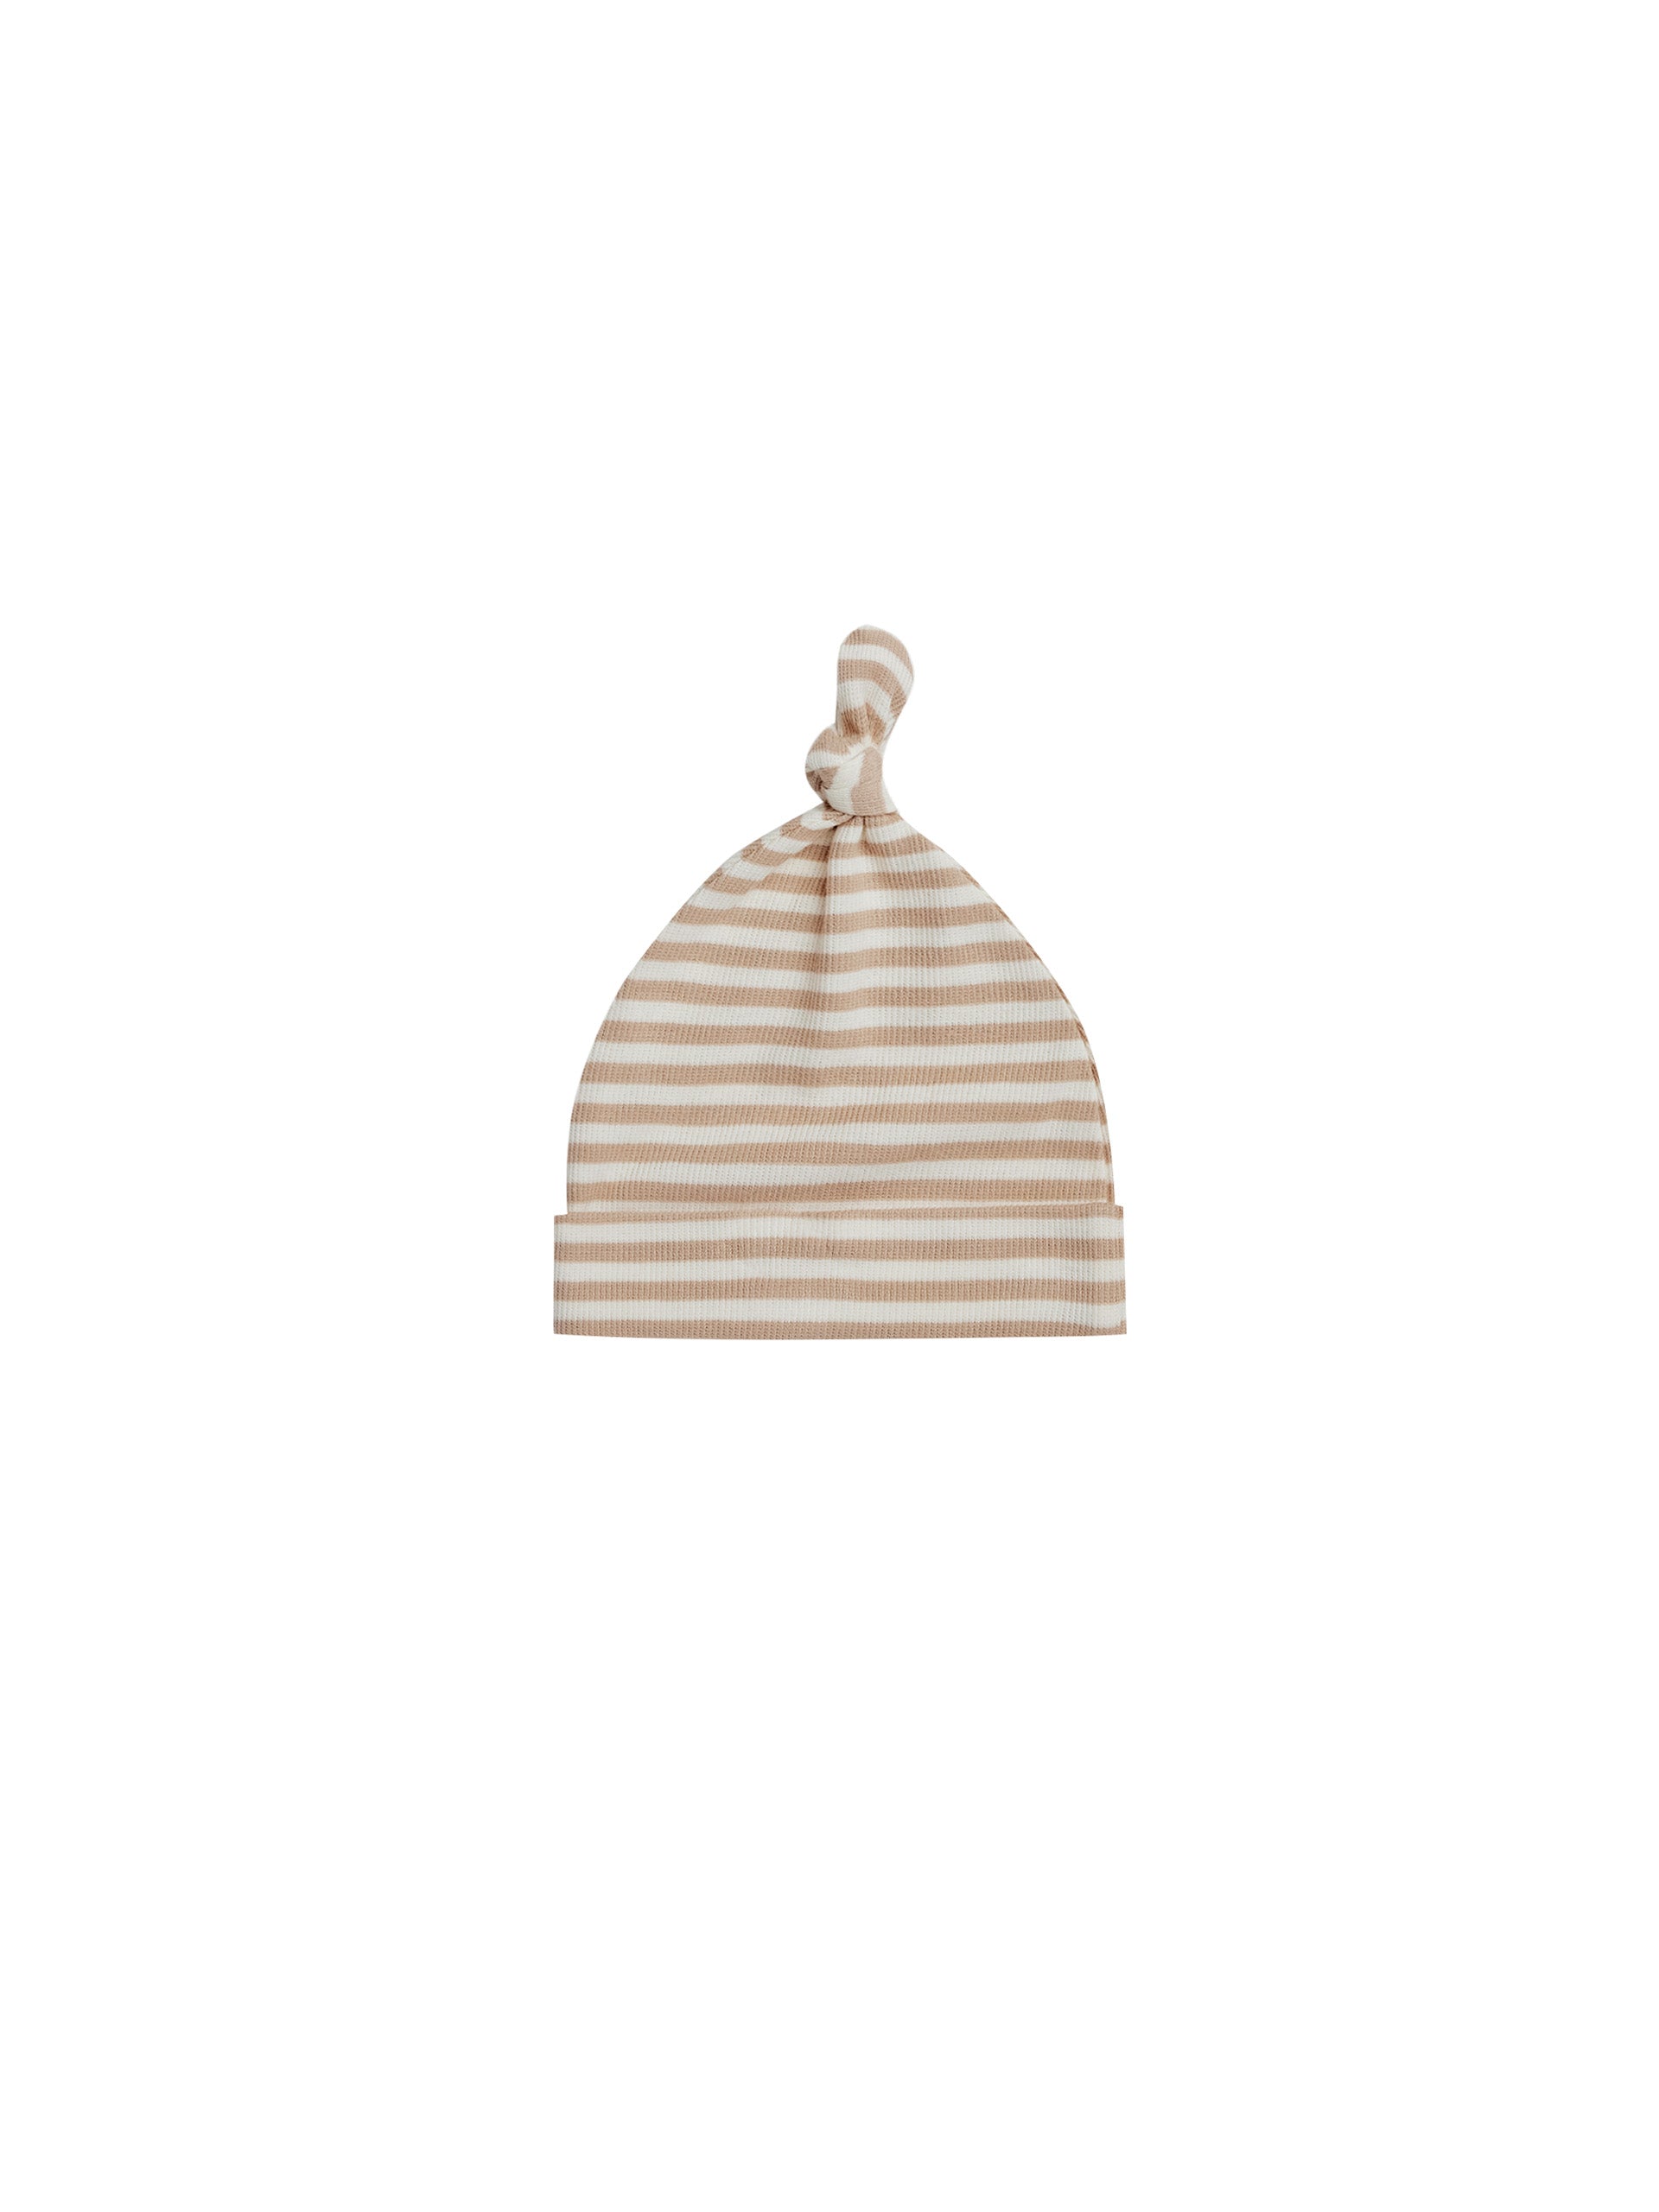 Quincy Mae Quincy Mae Knotted Baby Hat - Latte Stripe - Pearls & Swines